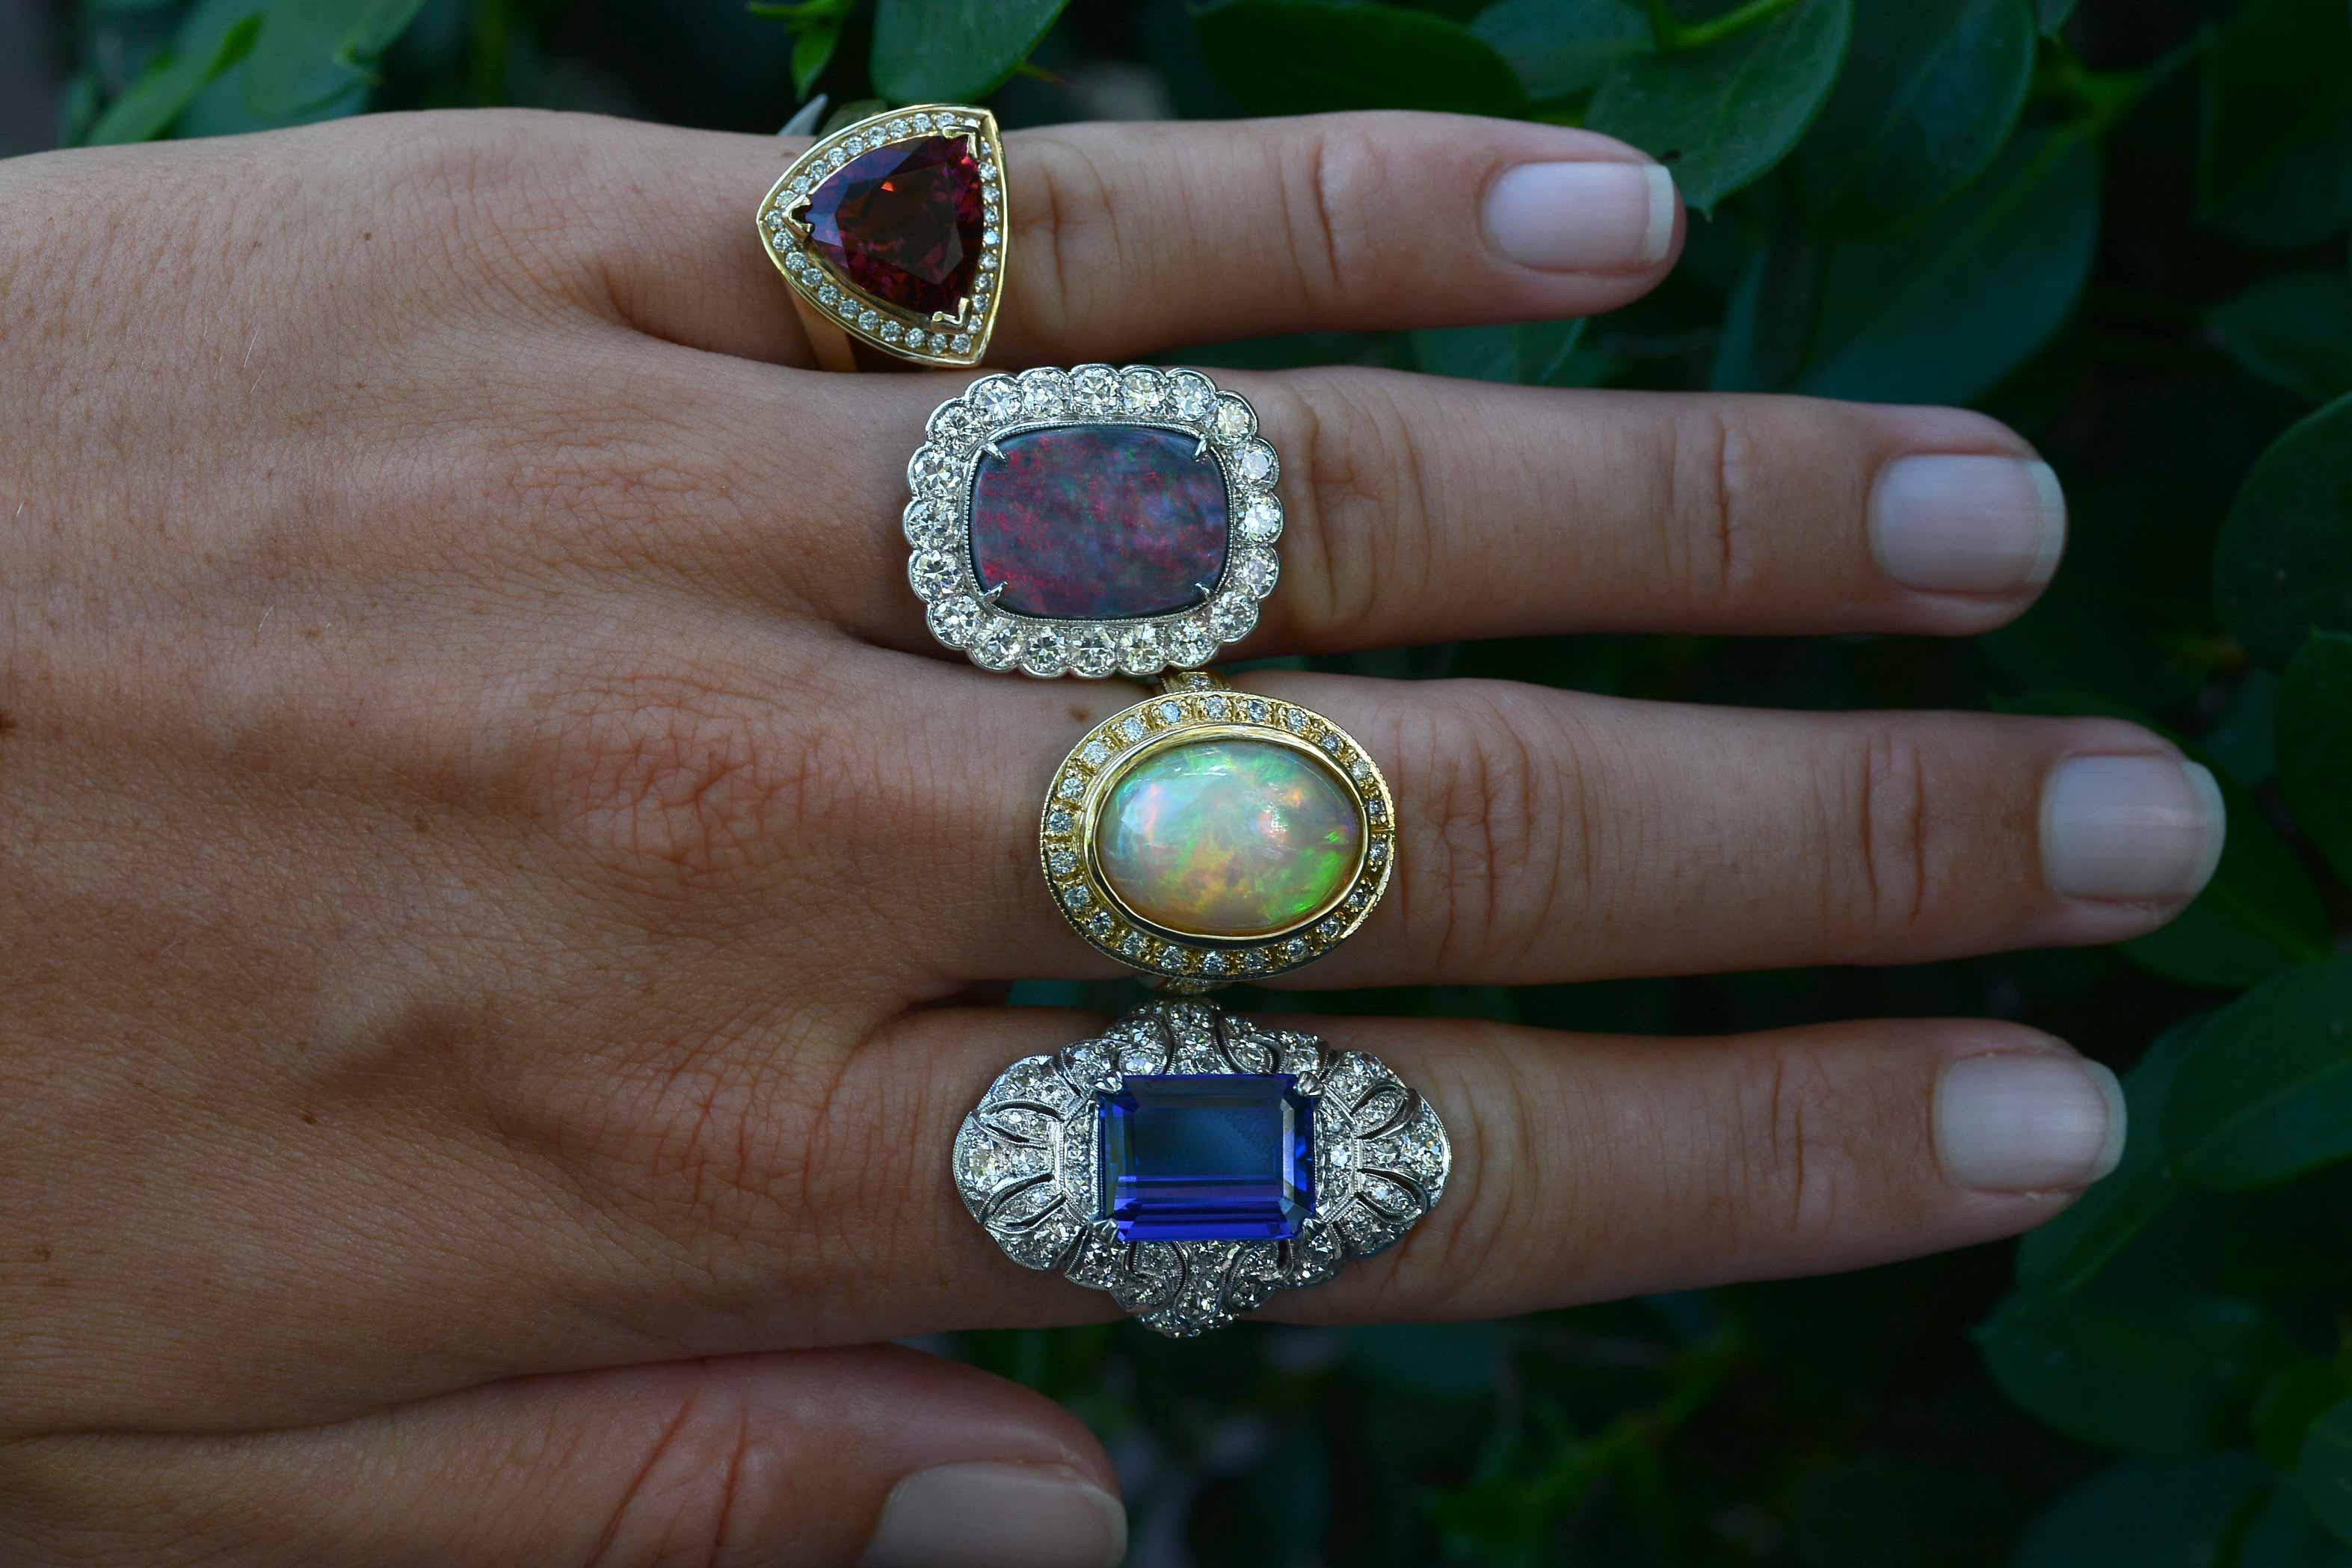 A most amazing 1930s vintage cocktail ring that is a knockout! This certified Black Opal from the famed Lightning Ridge, Australia mine displays a wonderfully strong play-of-color with rolling flashes displaying intense red, yellow, green and blue